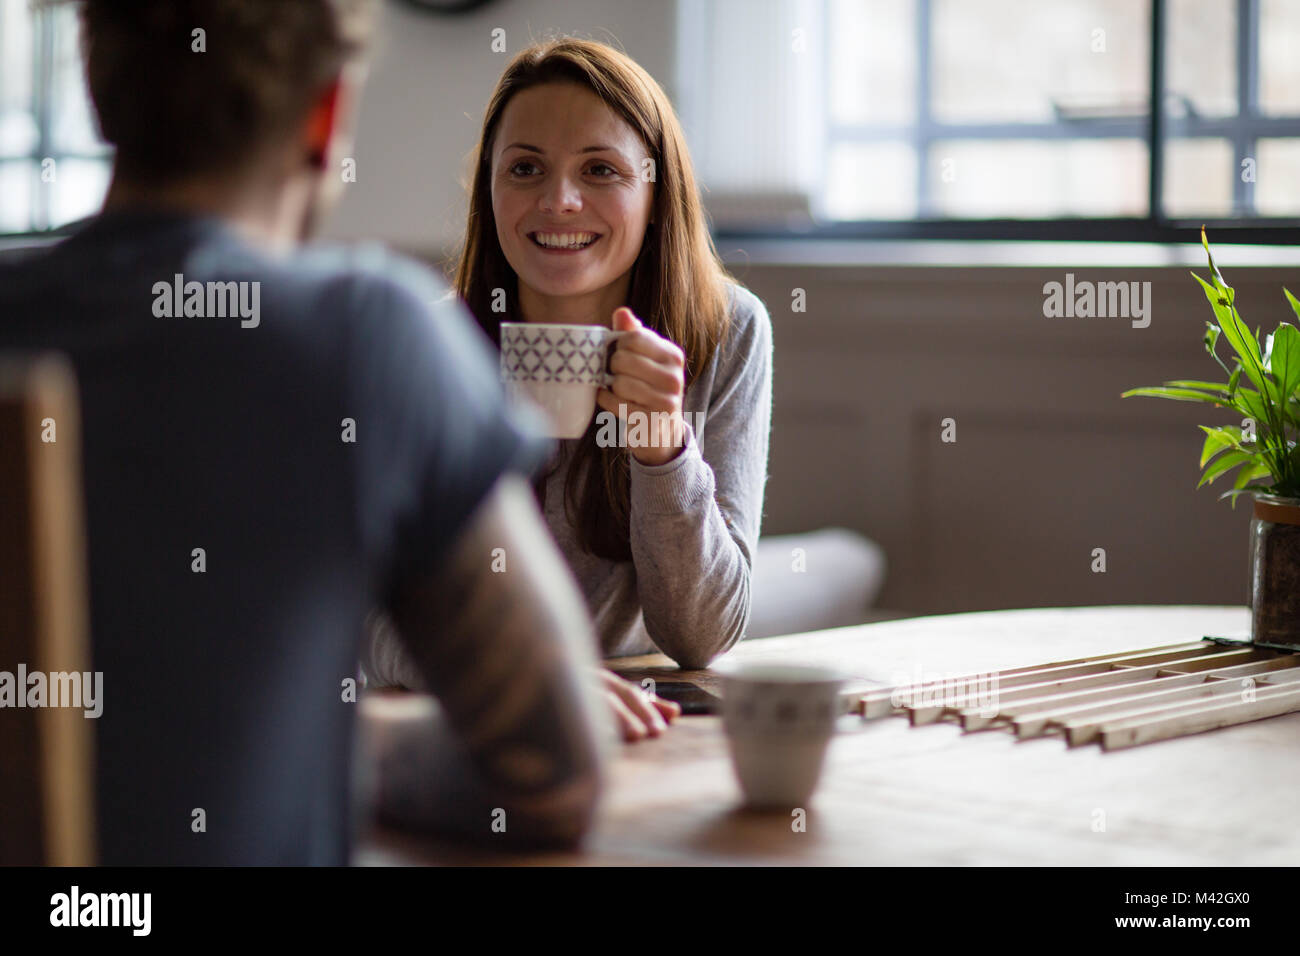 Young adult couple in a cafŽ together Stock Photo